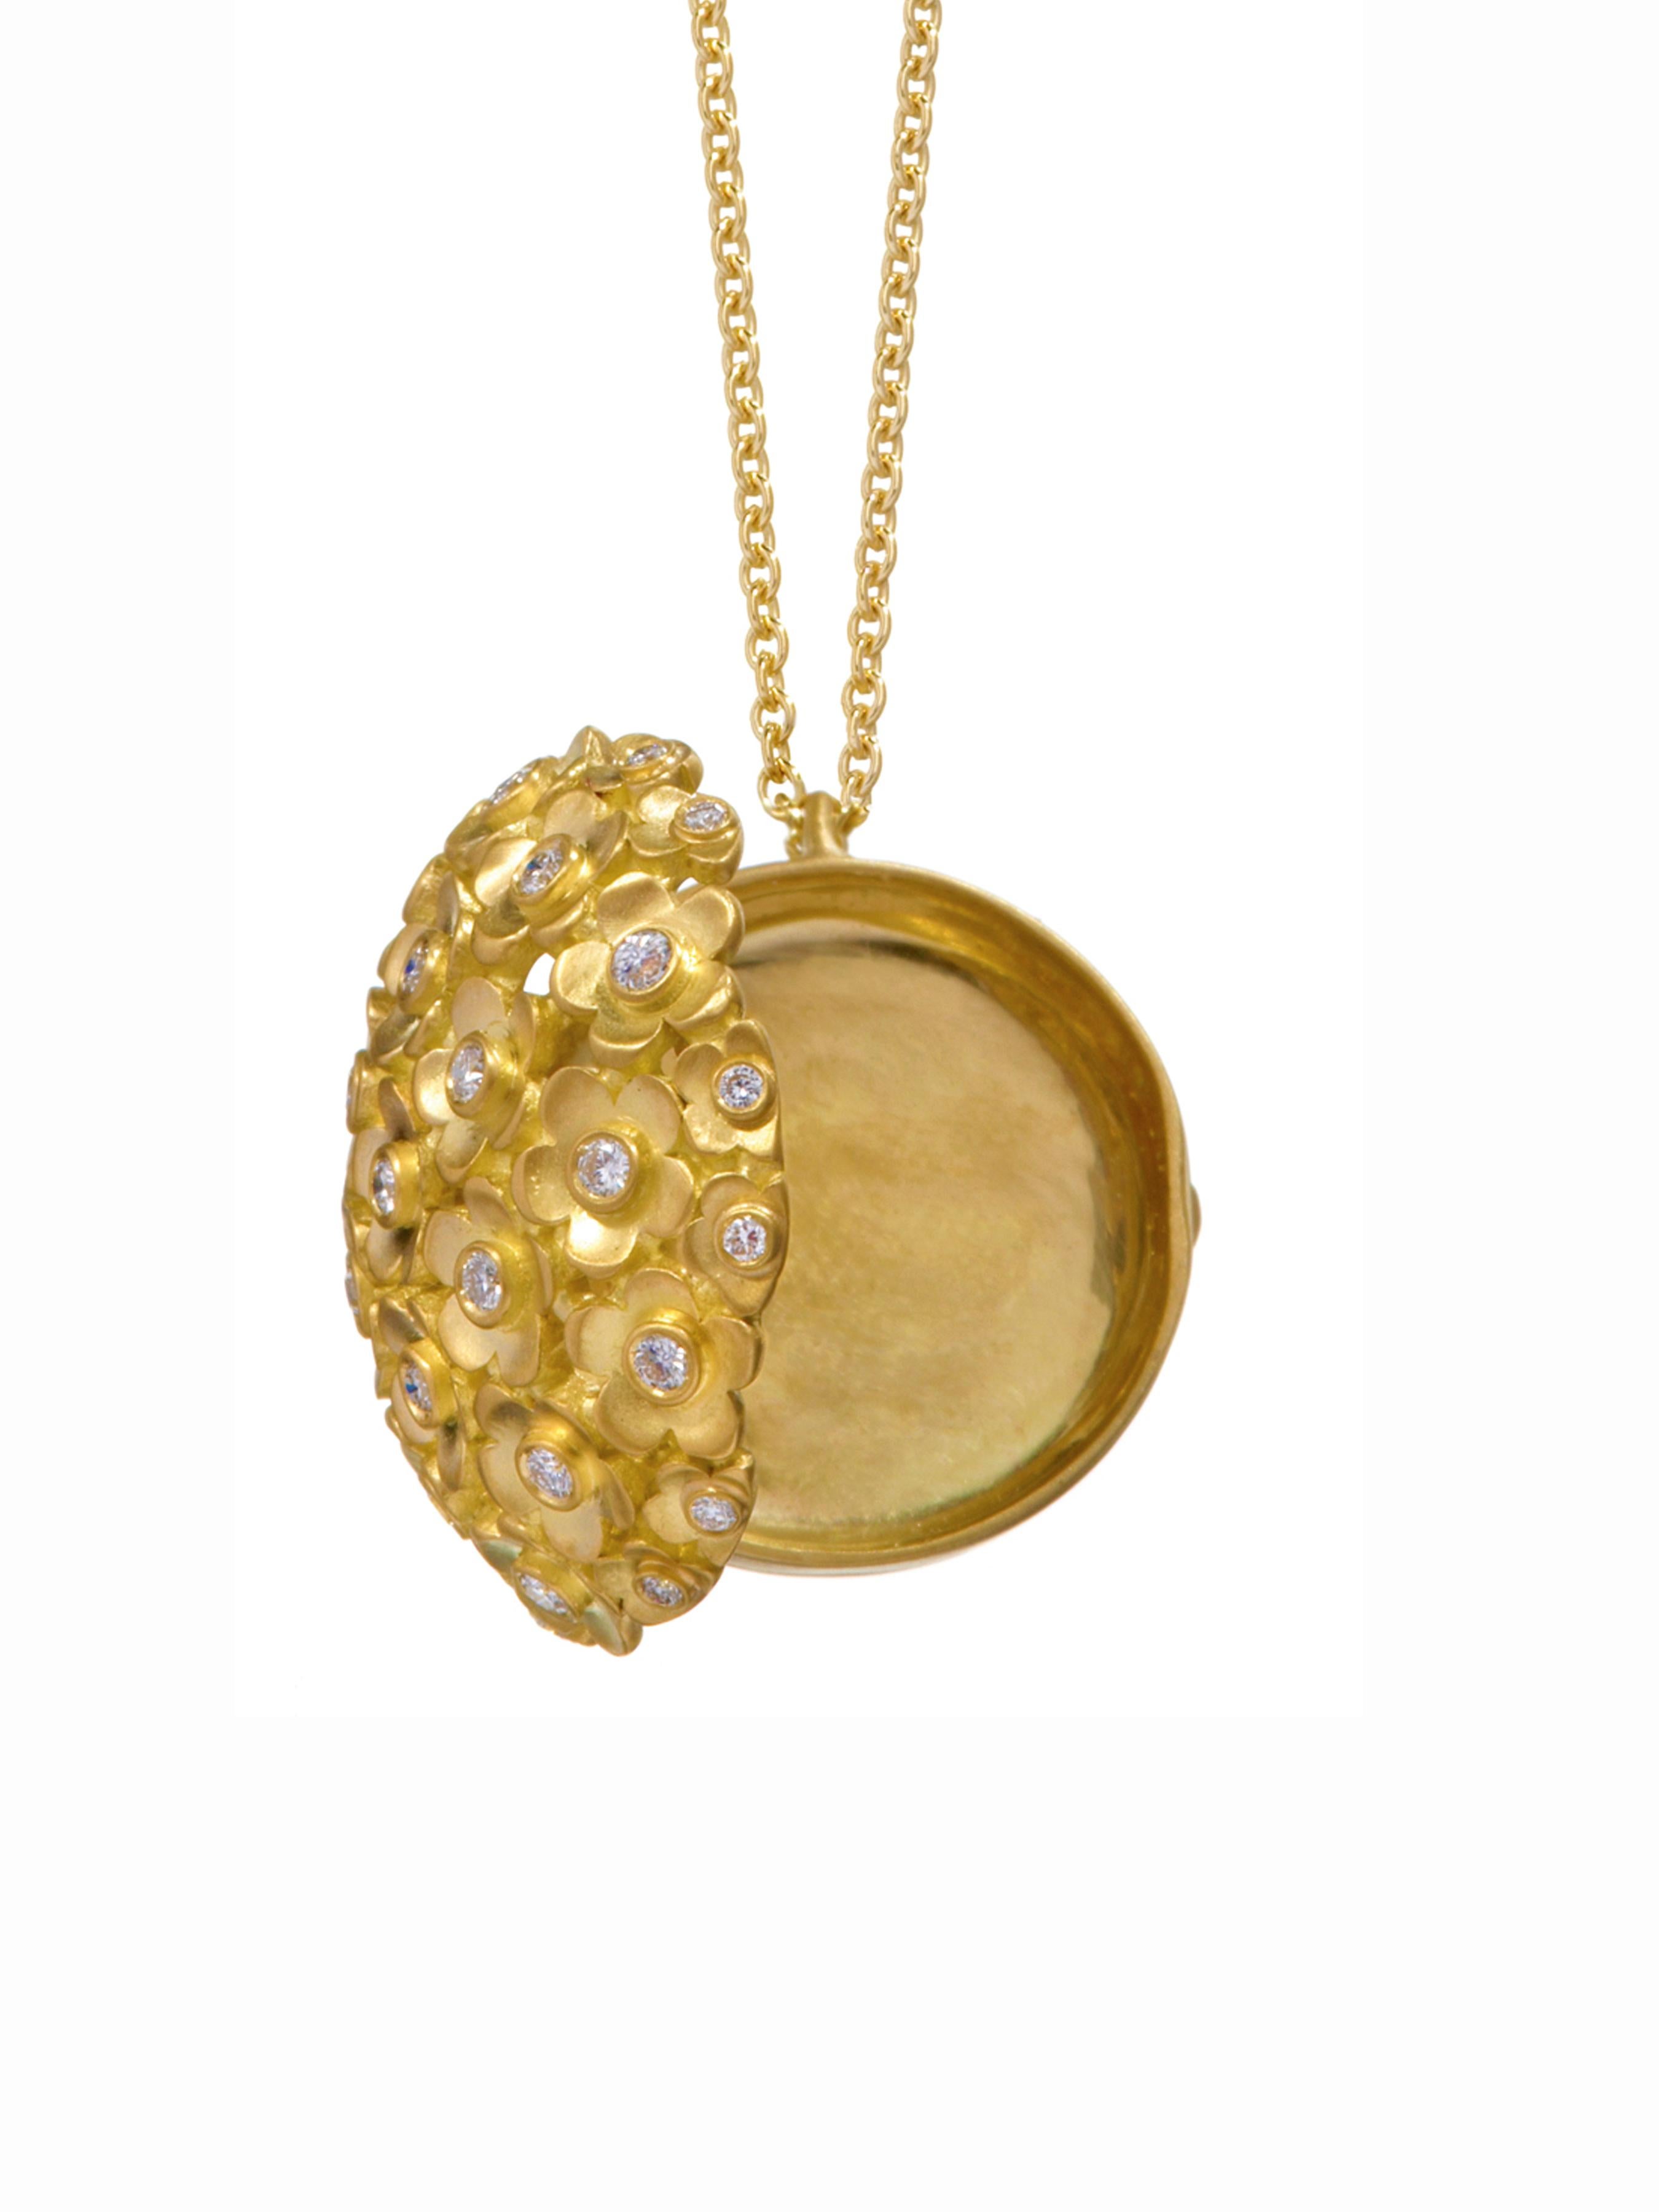 Round Cut Wendy Brandes Flower Opening Scent Locket Diamond and Gold Ring and Necklace Set